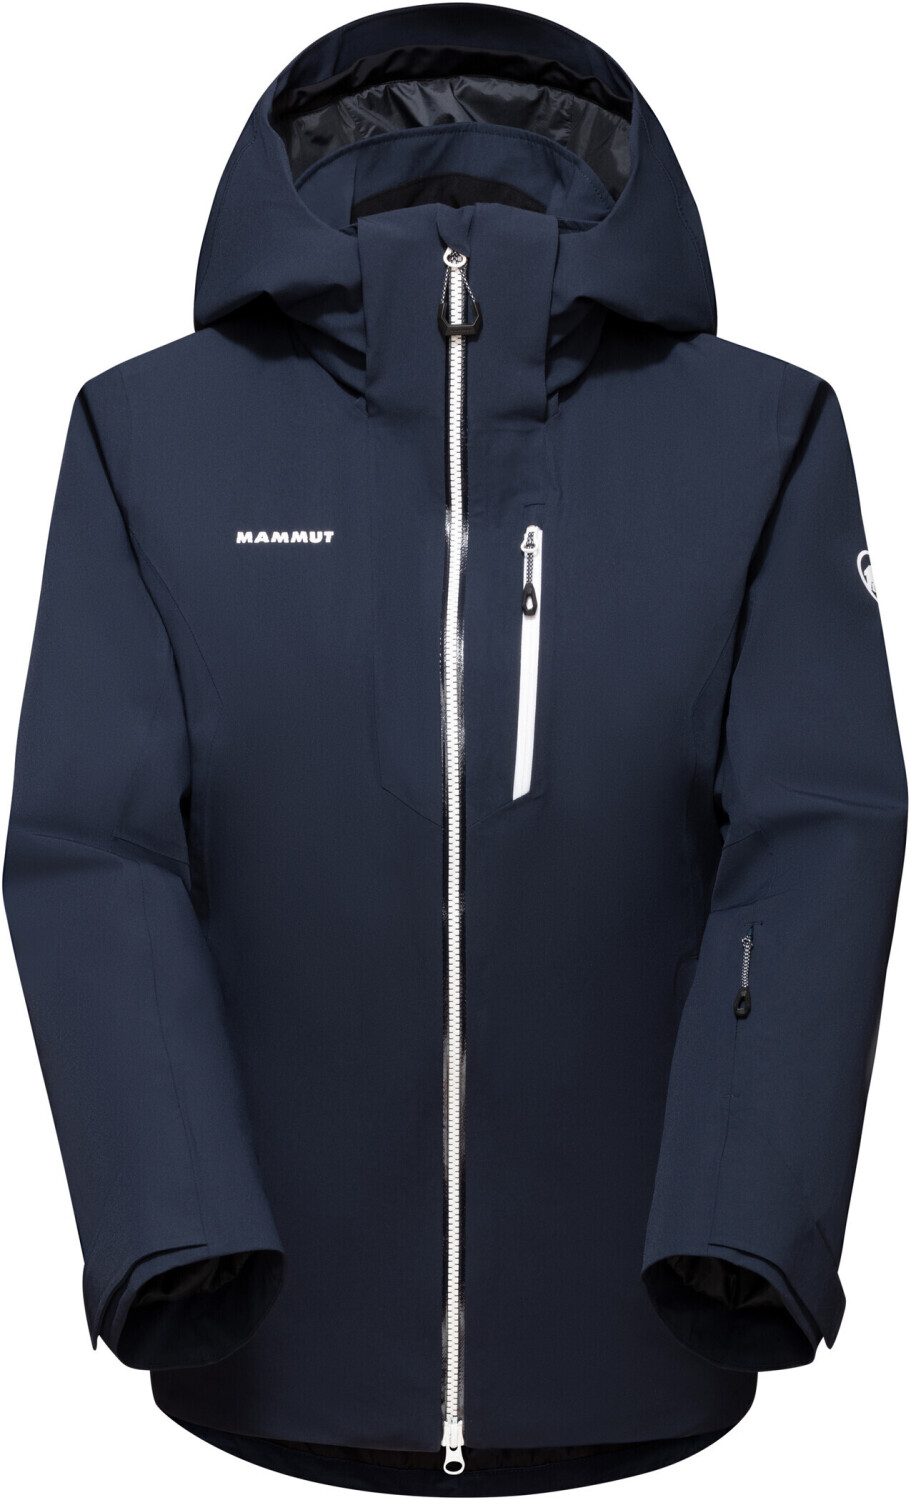 Buy Mammut Stoney HS Thermo Jacket Women (1010-28180) marine/white from  £273.93 (Today) – Best Deals on